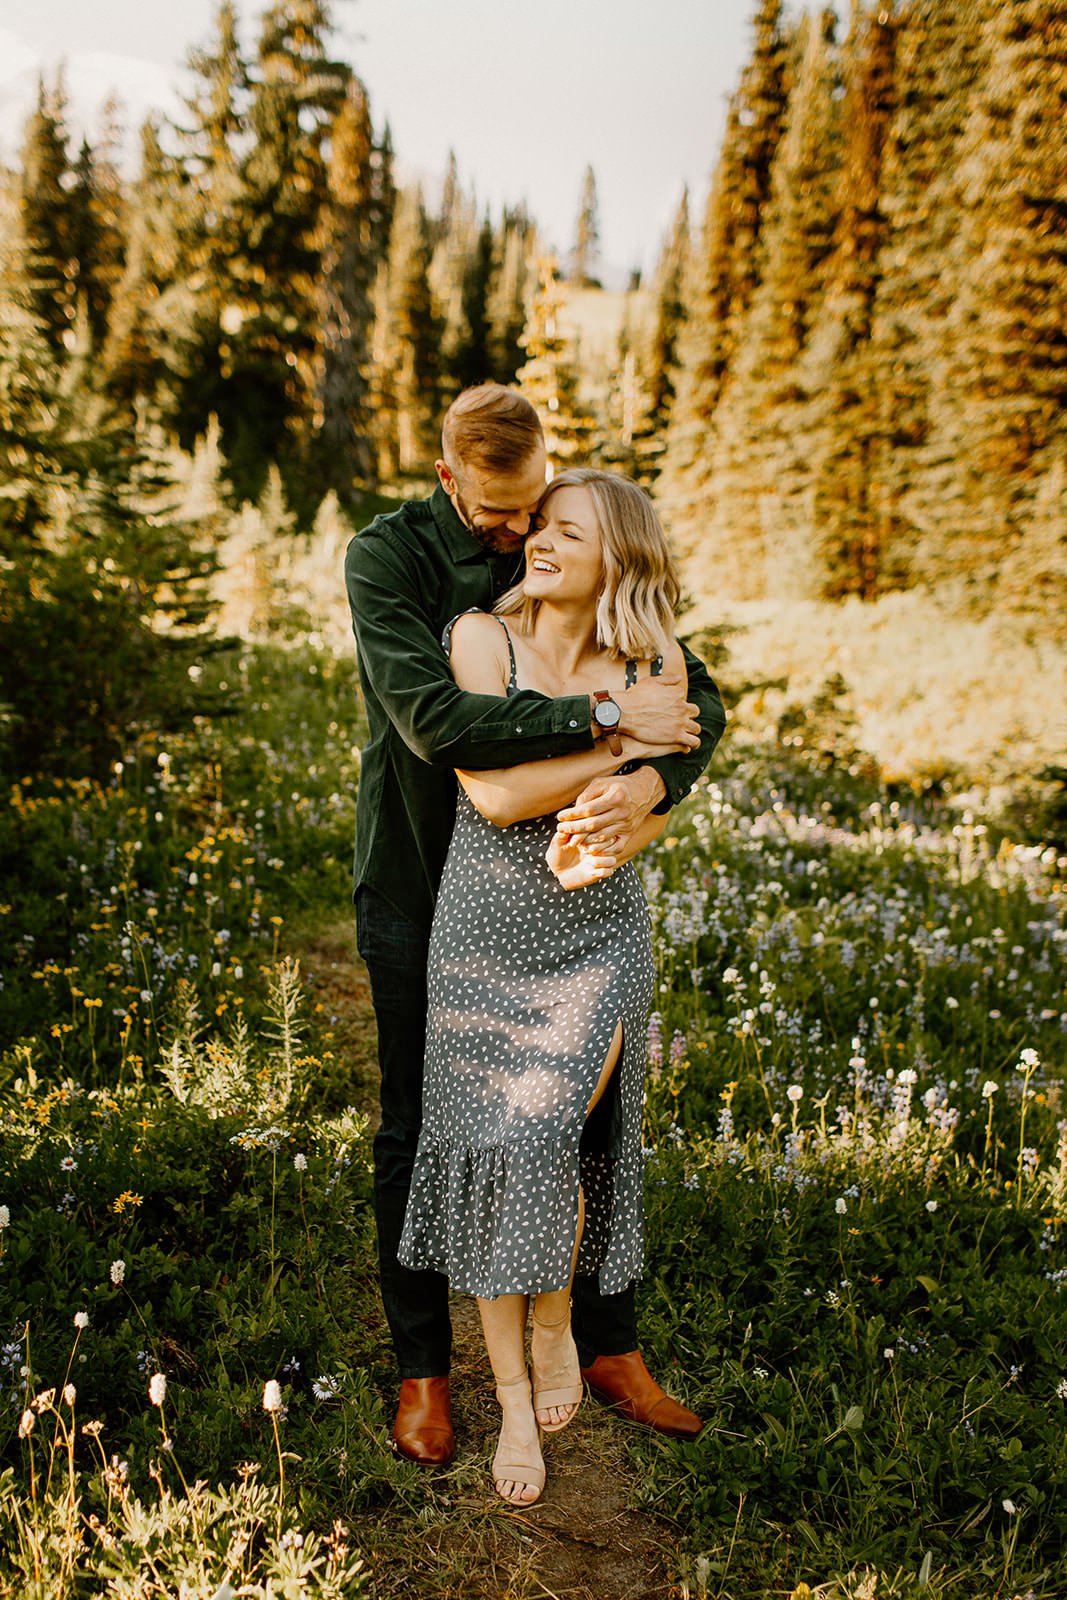 Fiance hugging his girl friend from behind in a meadow of wildflowers in mt. rainier national park